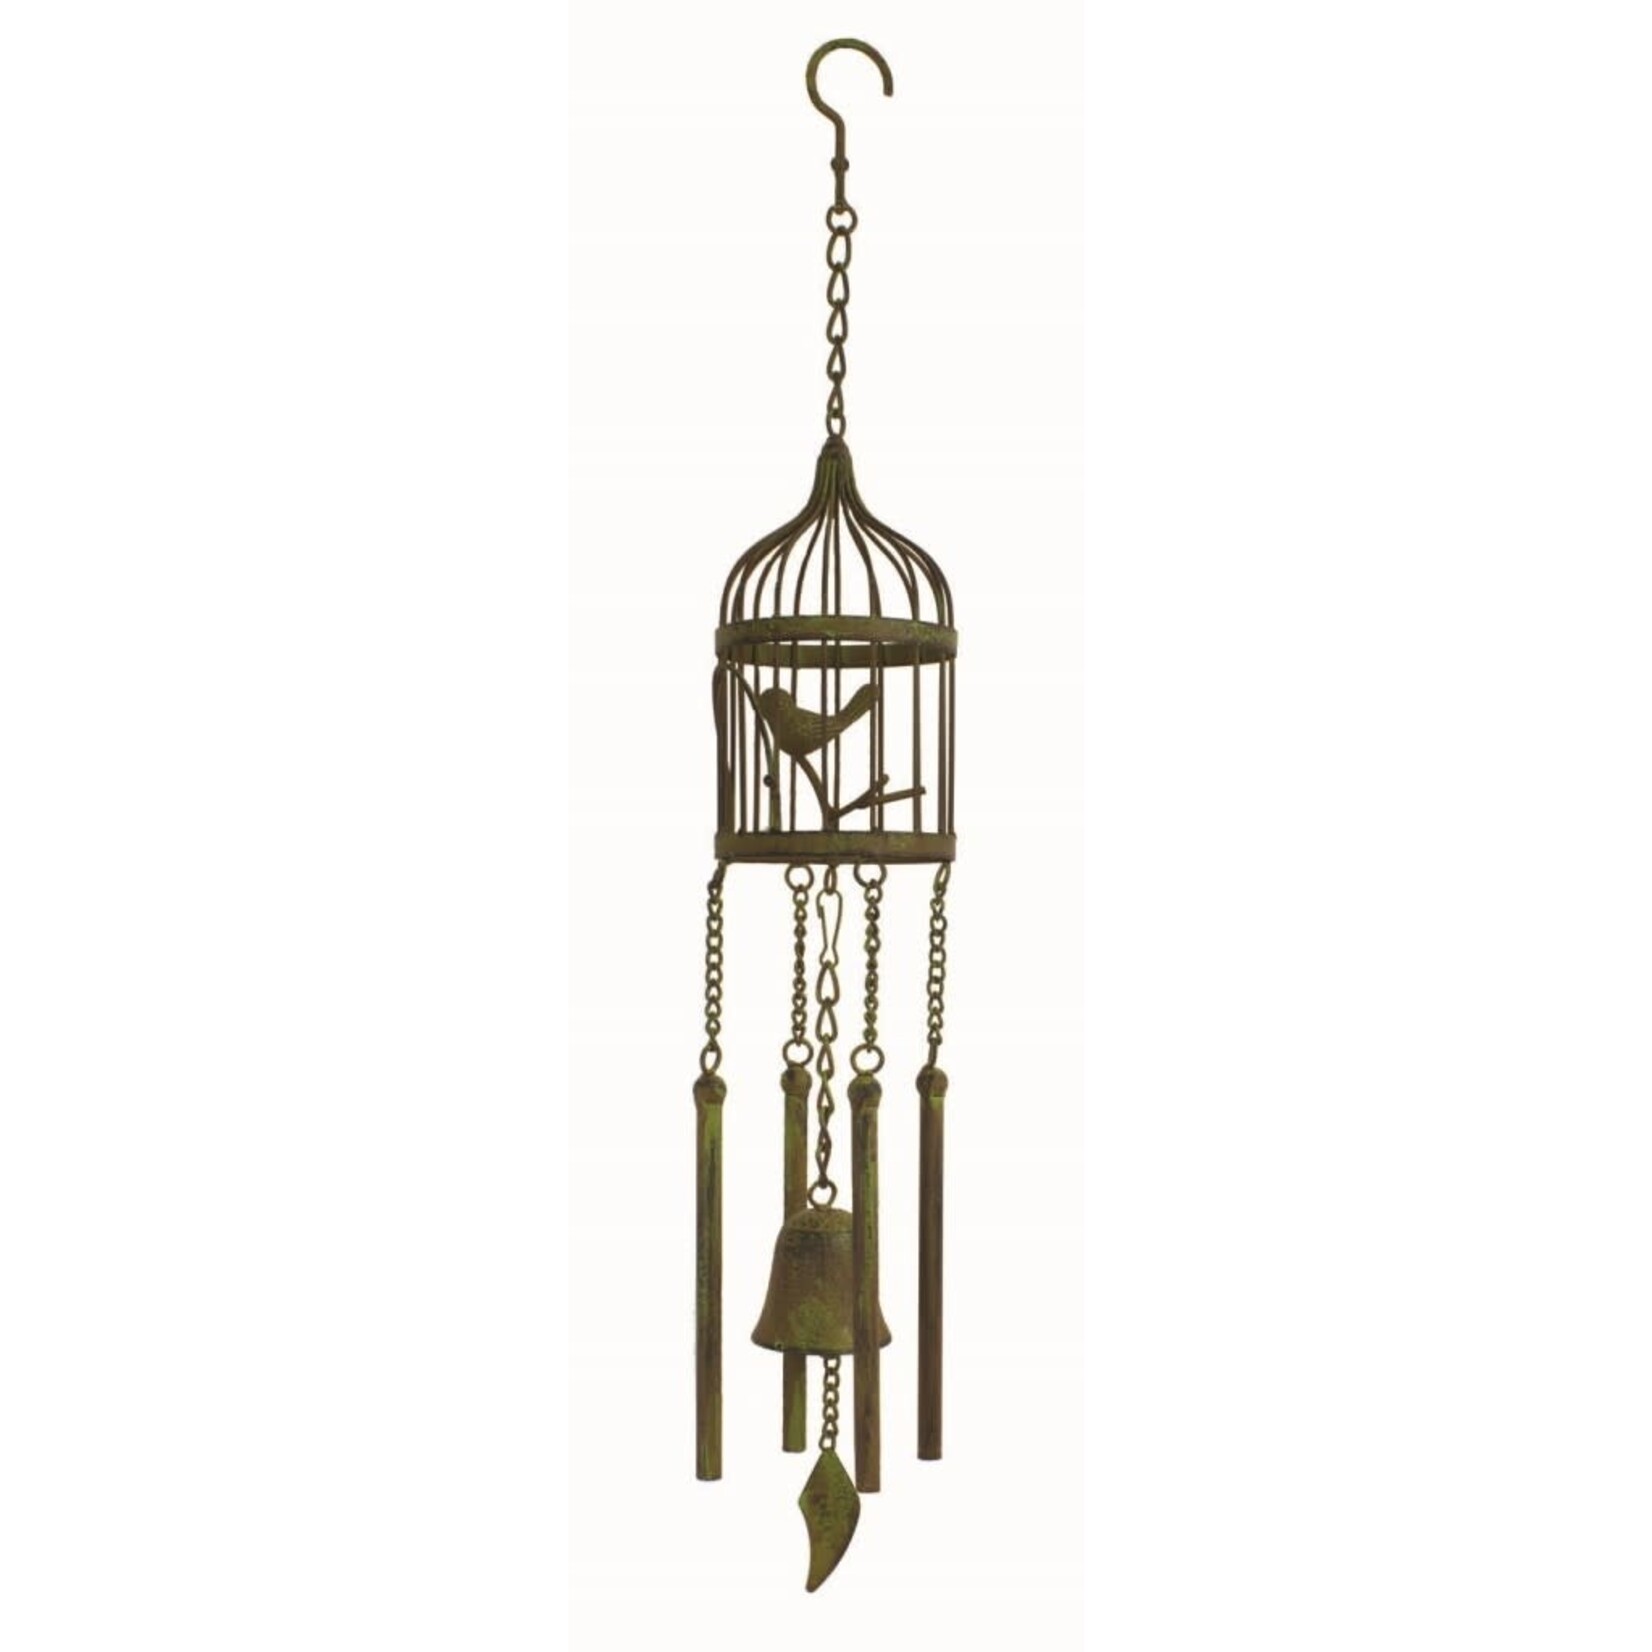 Birdcage Bell Chime